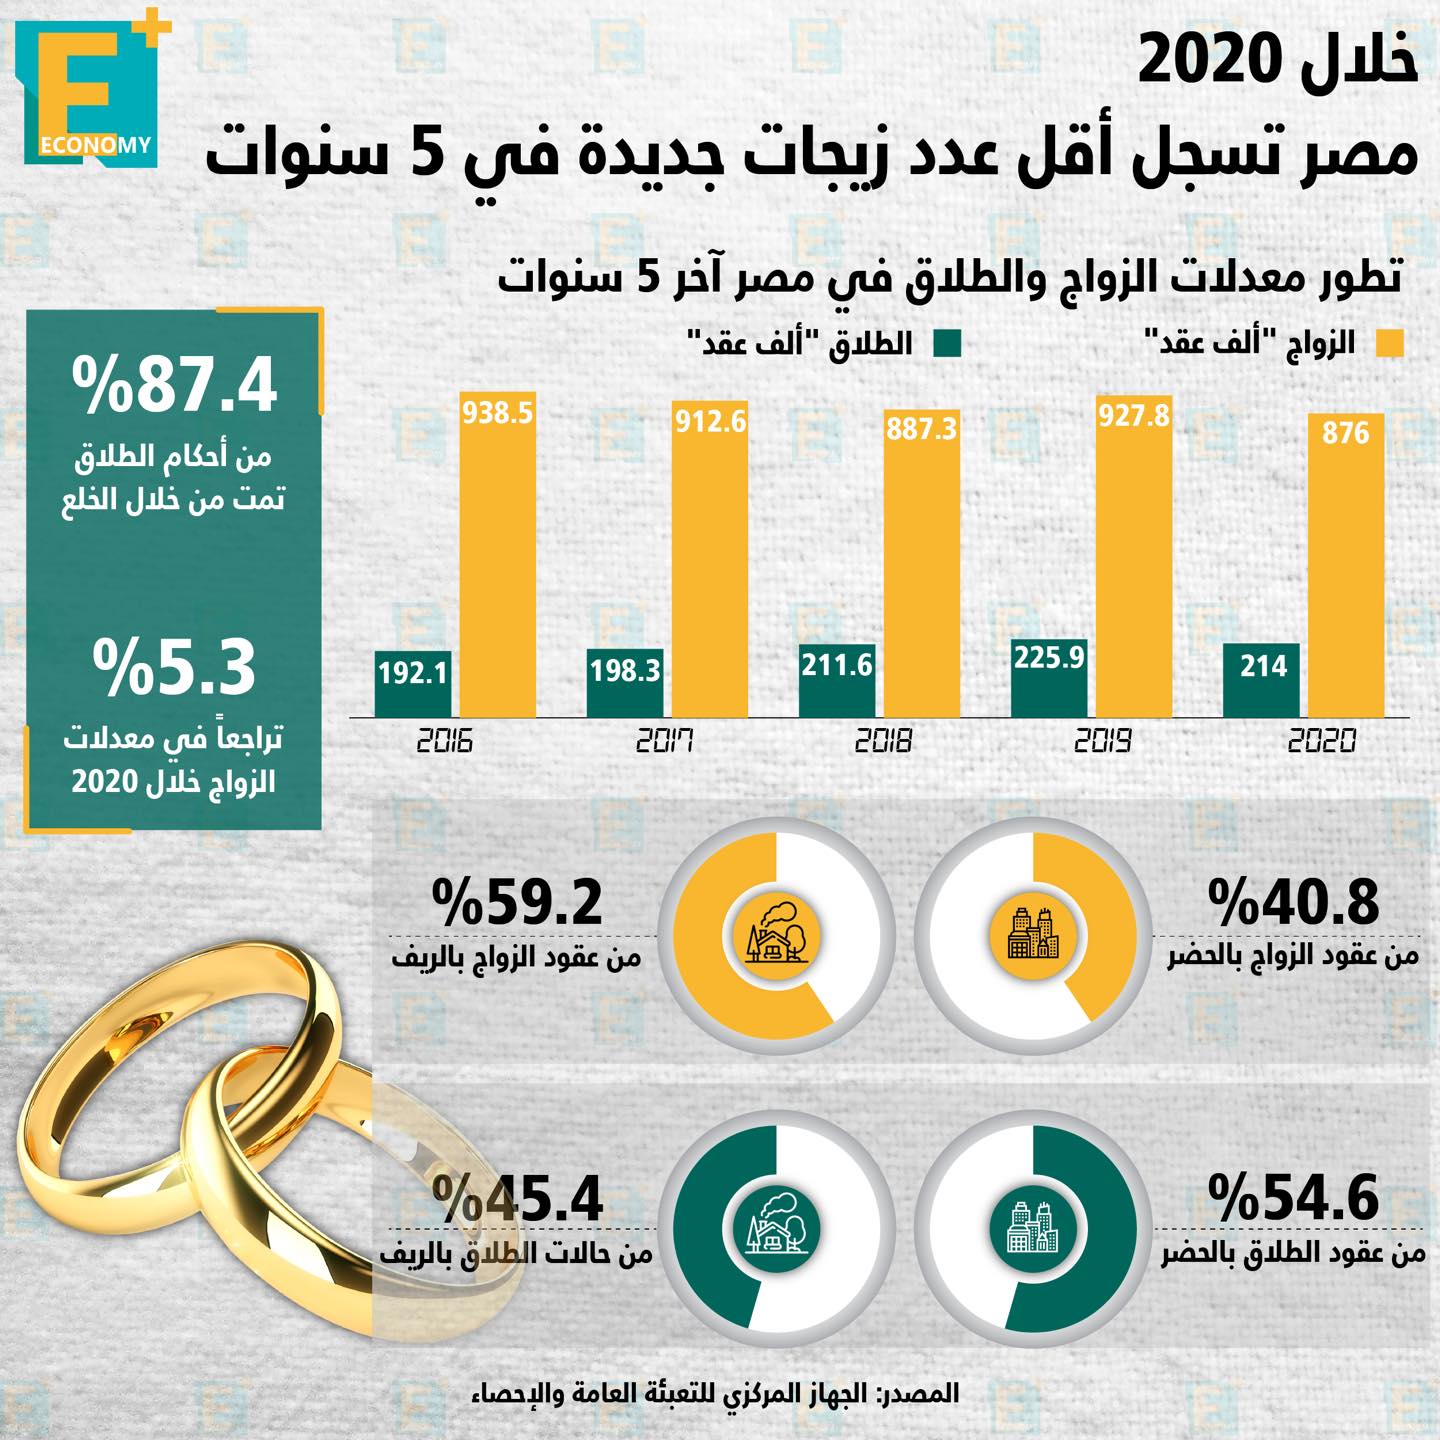 Marriage and divorce in Egypt 2020.